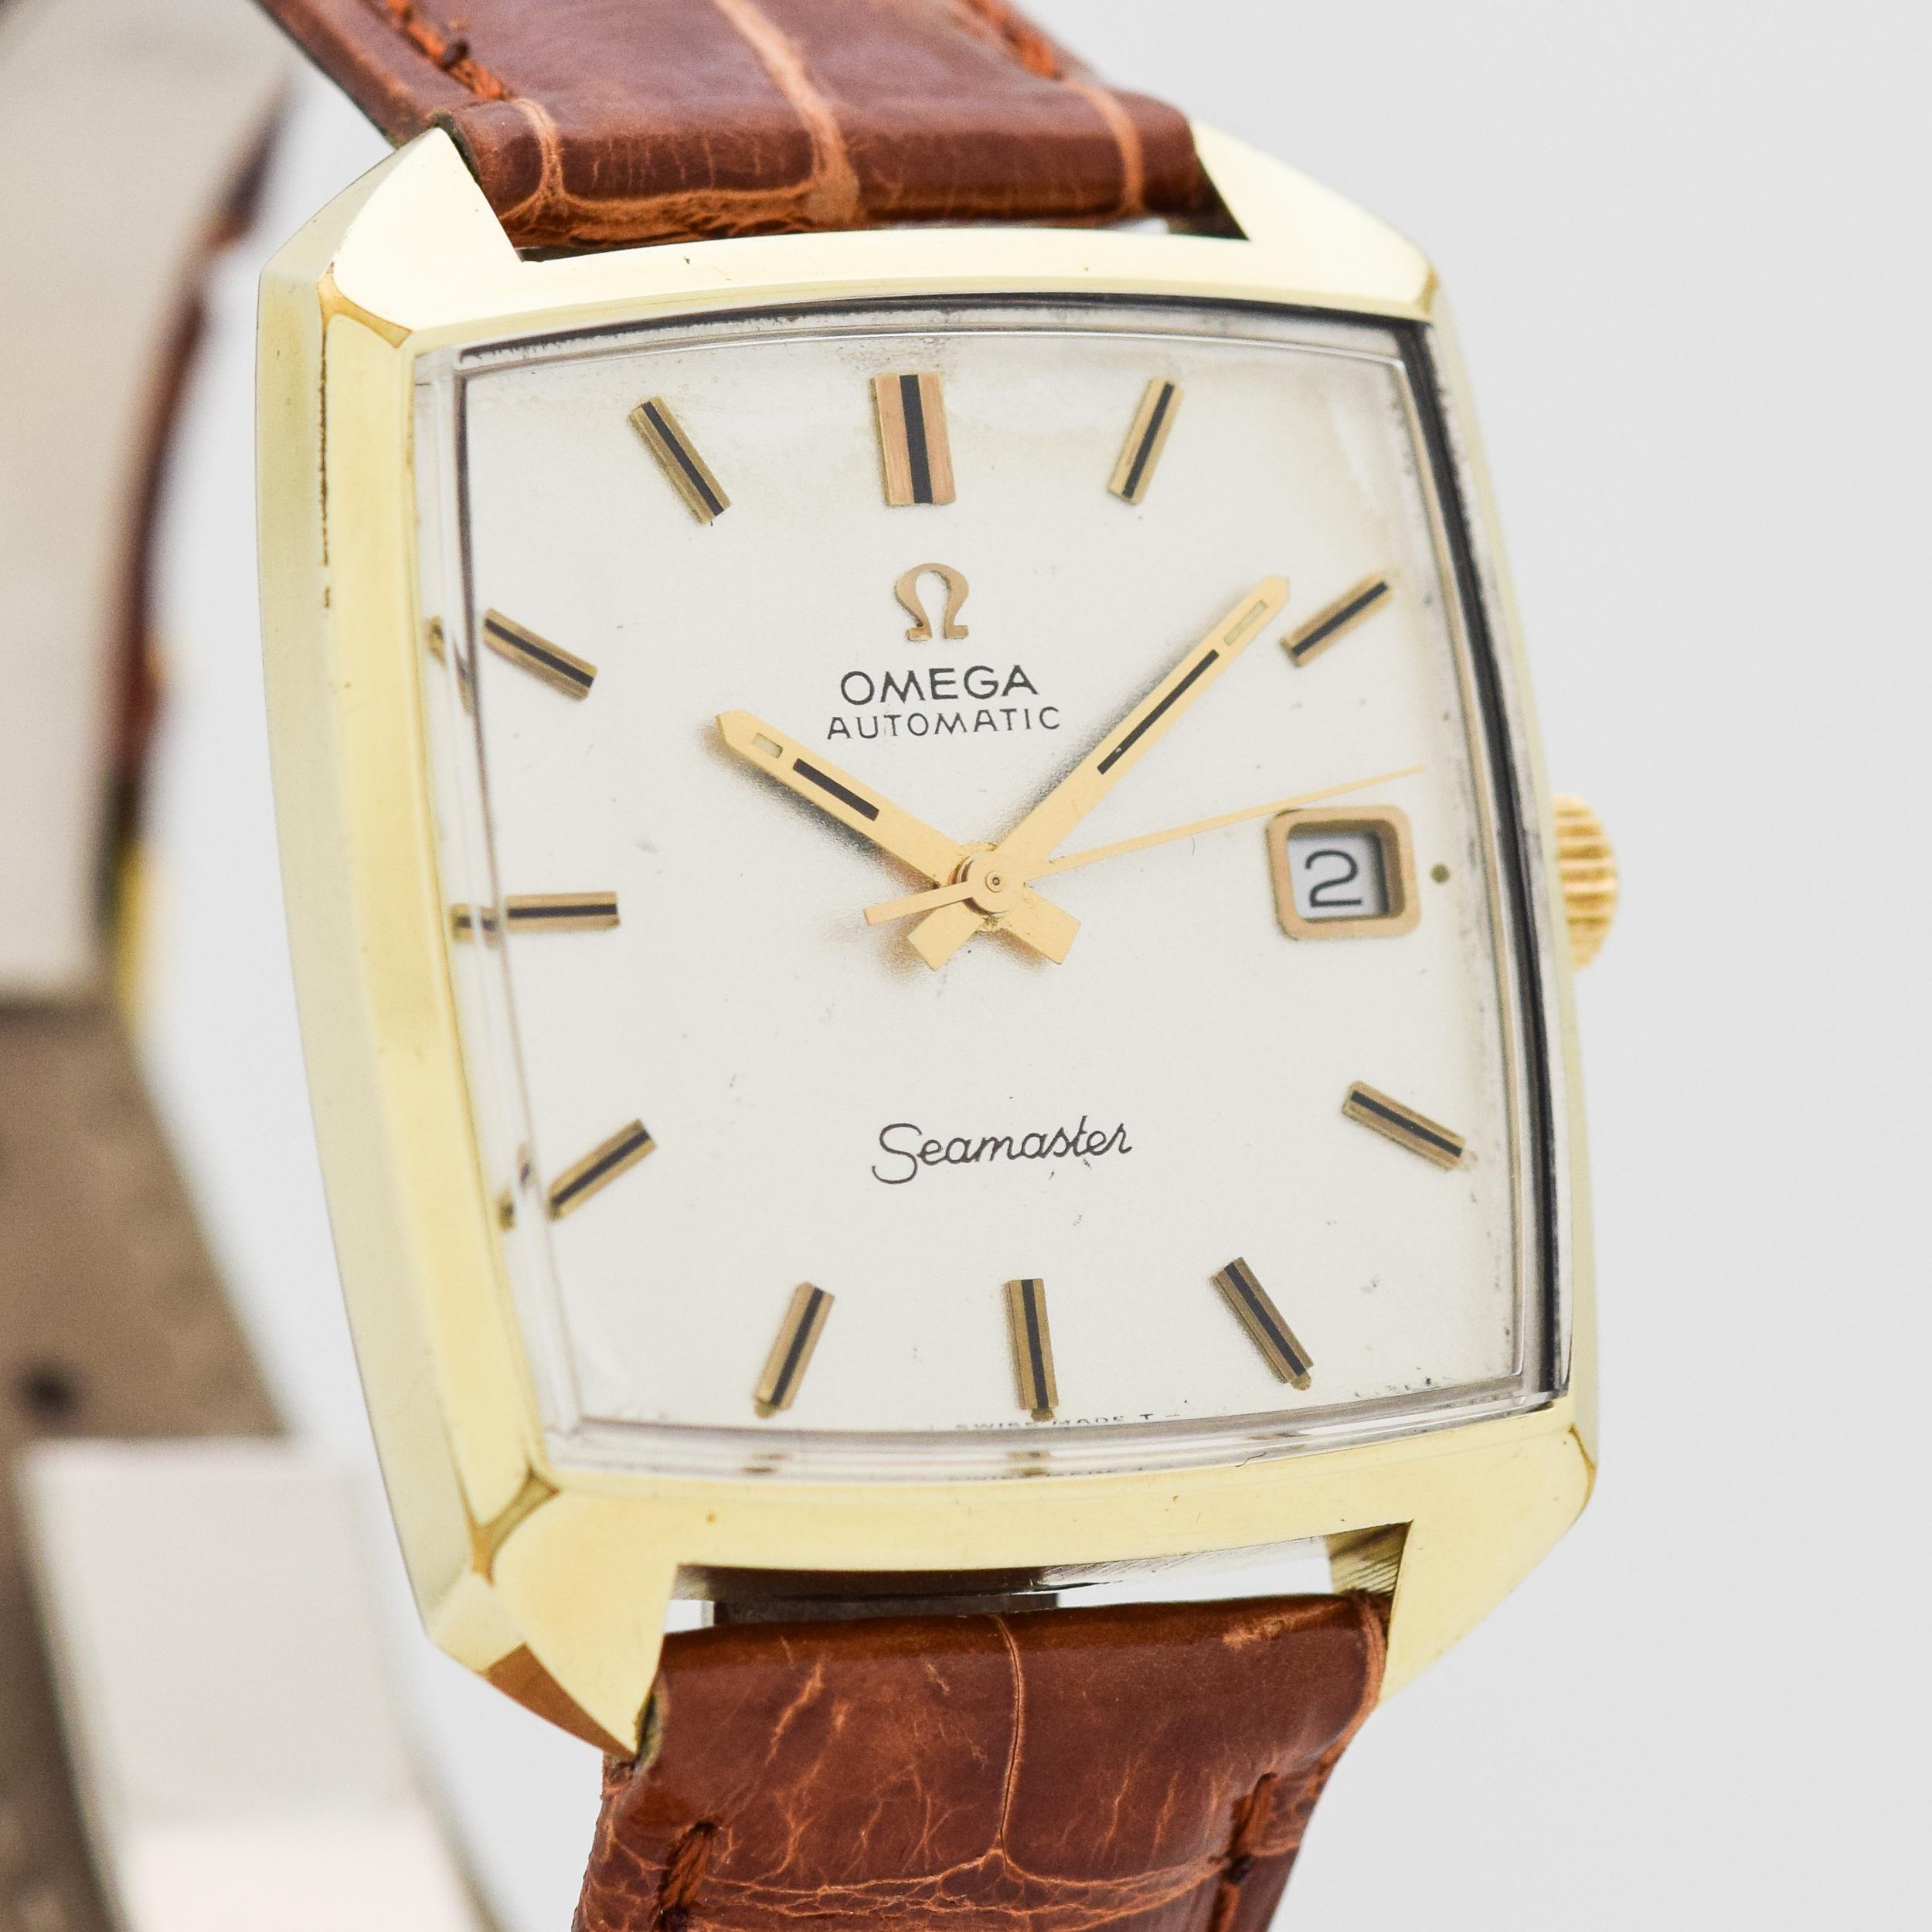 1970 Vintage Omega Seamaster Compressor Automatic Date 18k Yellow Gold Plated with Stainless Steel Case Back Watch with Original Silver Dial with Applied Gold Color Stick/Bar/Baton Markers with Black Inlay. 33mm x 39mm lug to lug (1.3 in. x 1.54